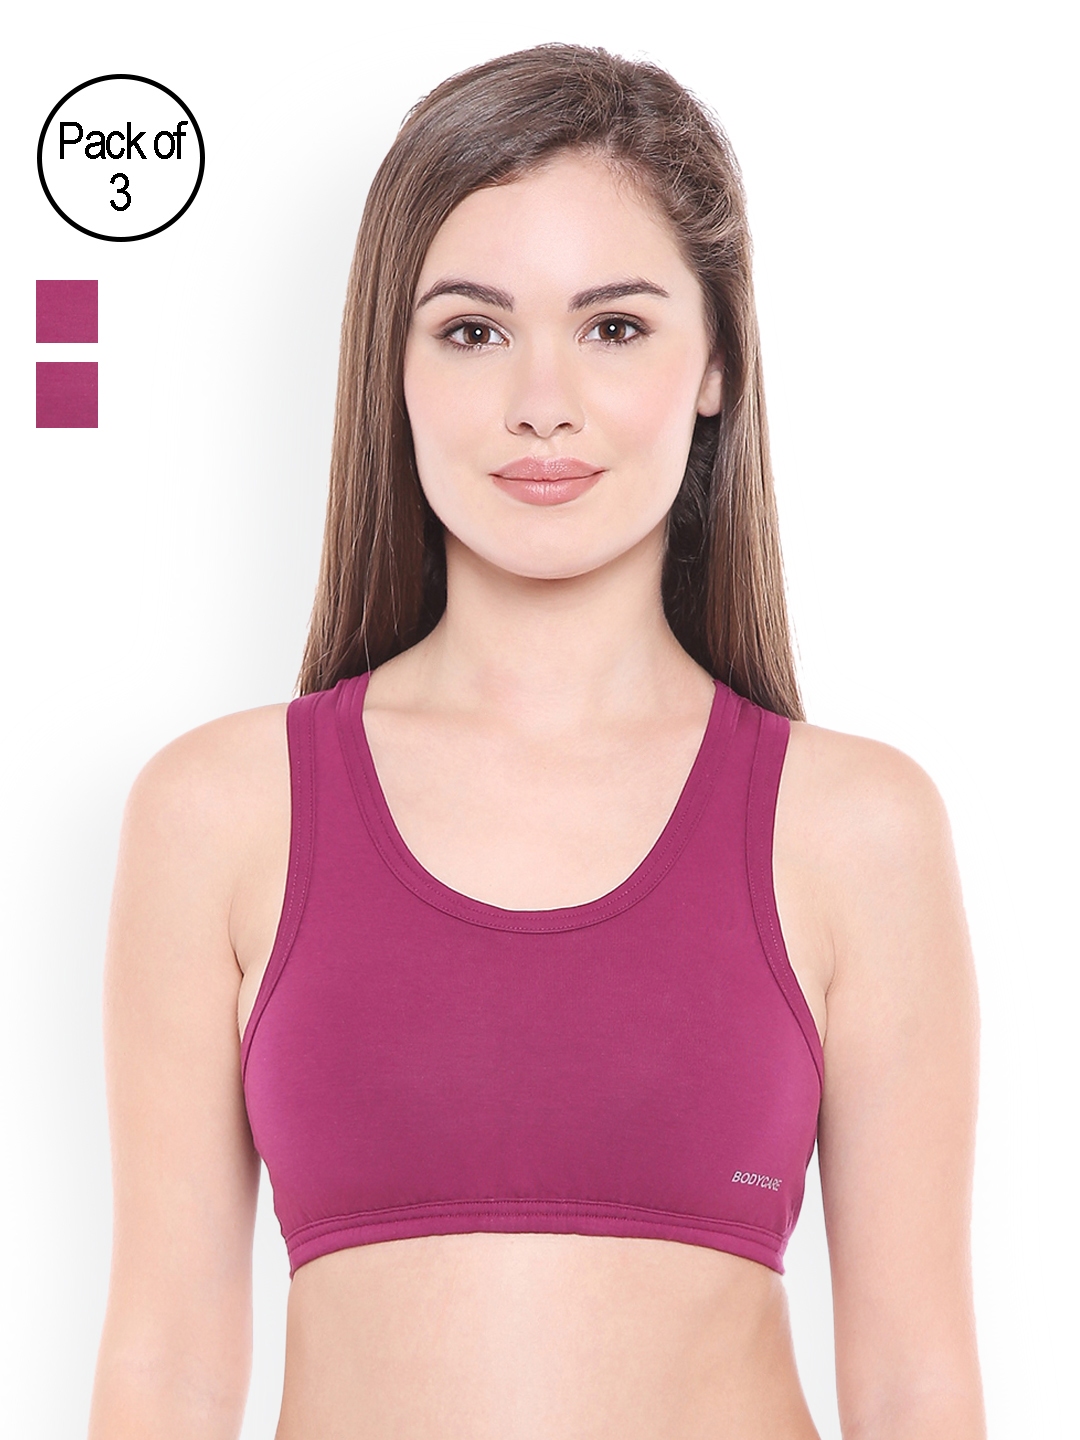 Buy Bodycare Pack Of 3 Full Coverage Sports Bras E1610WIWIWI - Bra for  Women 5451491